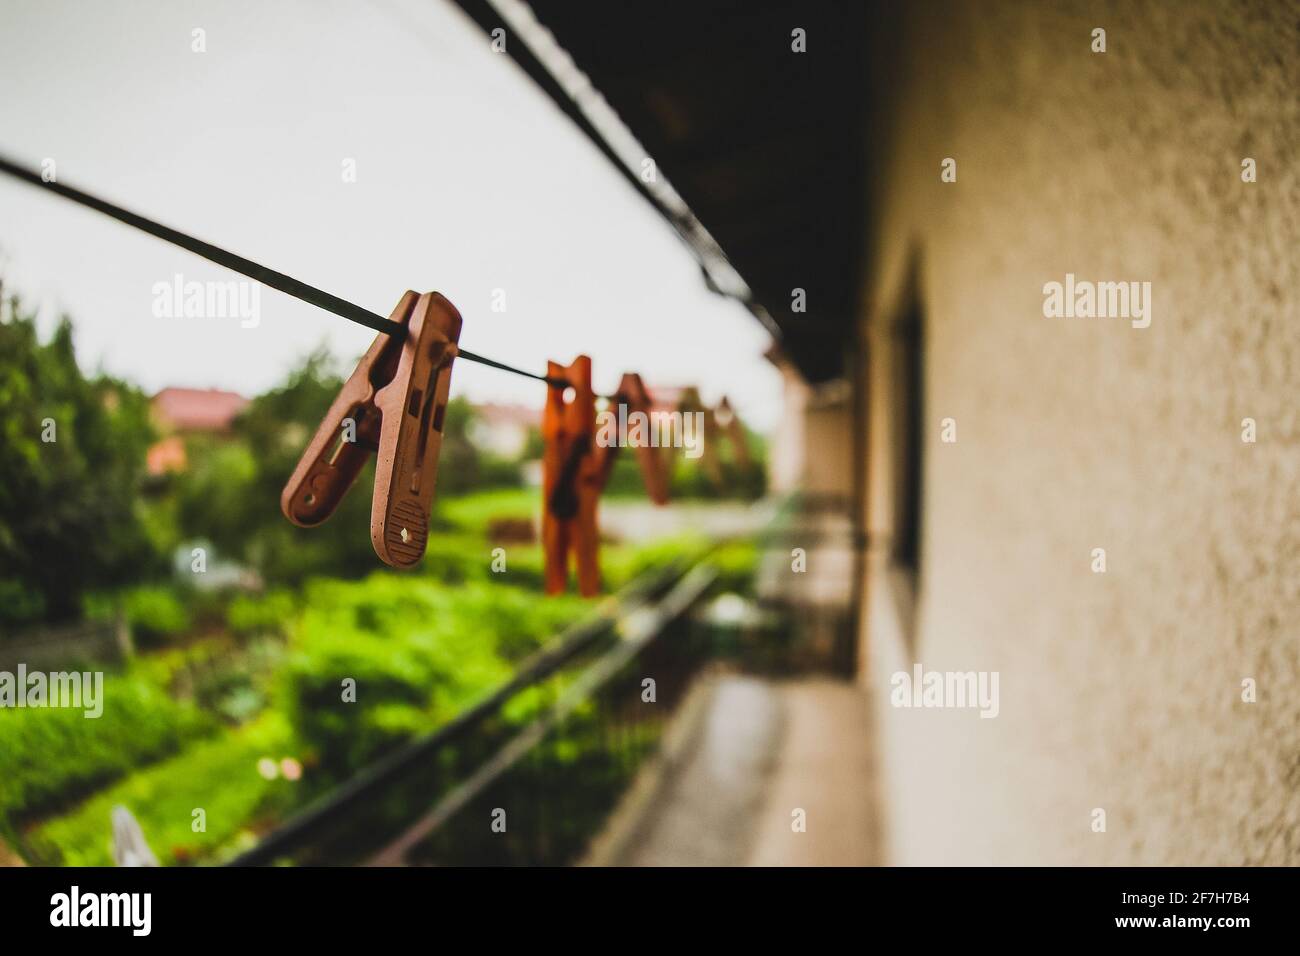 Detail of a peg for drying clothes. A line for drying clothes with pegs on the balcony in the suburban area of the city. Empty clothes washing line. Stock Photo